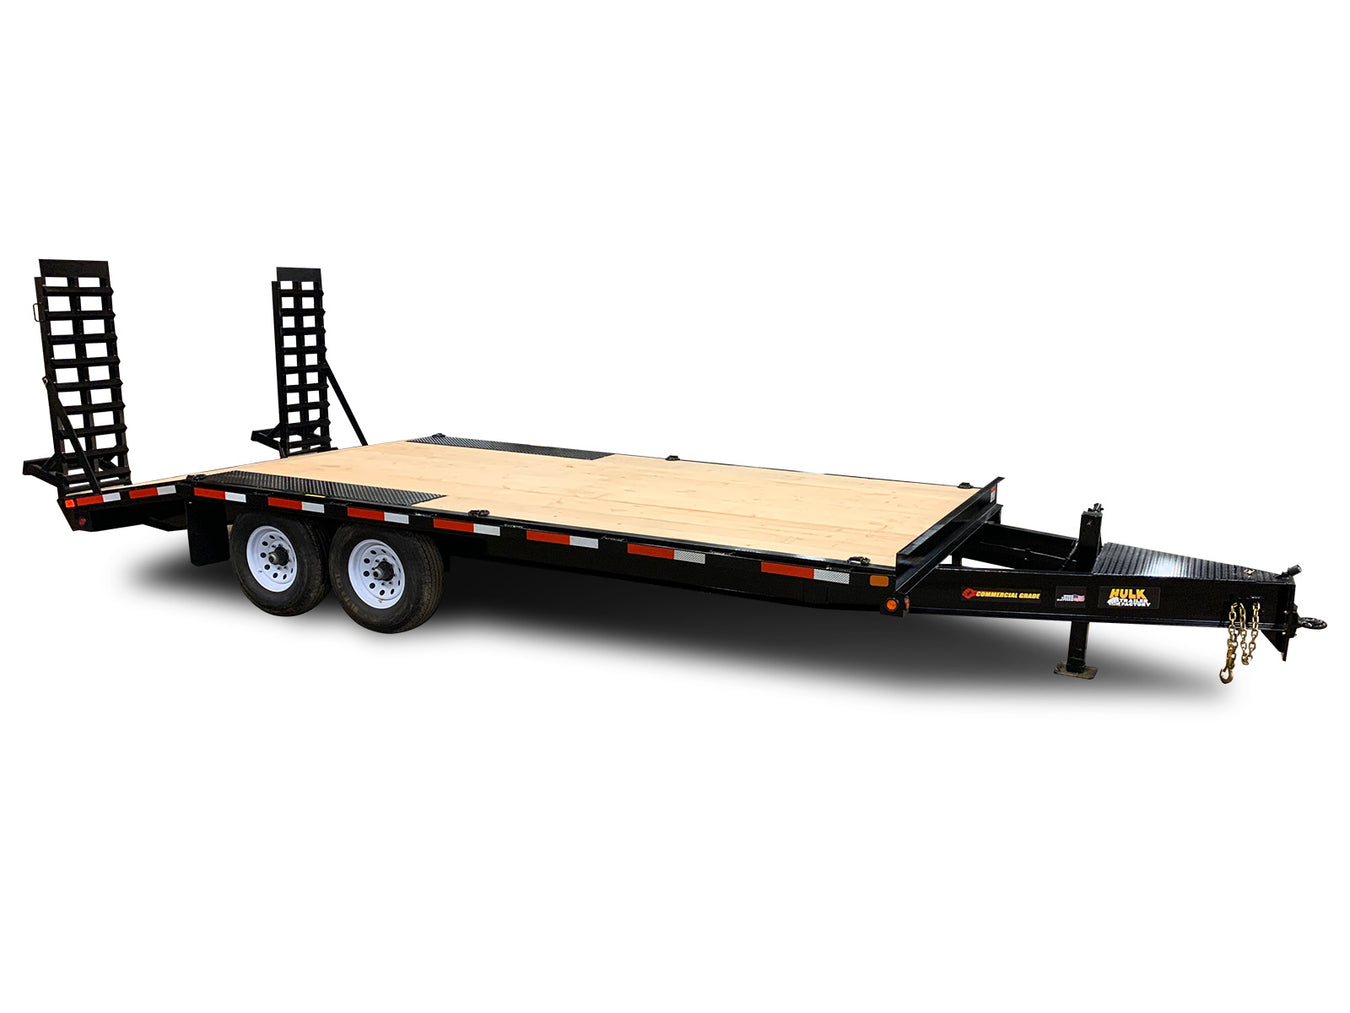 Deckover Float Trailers